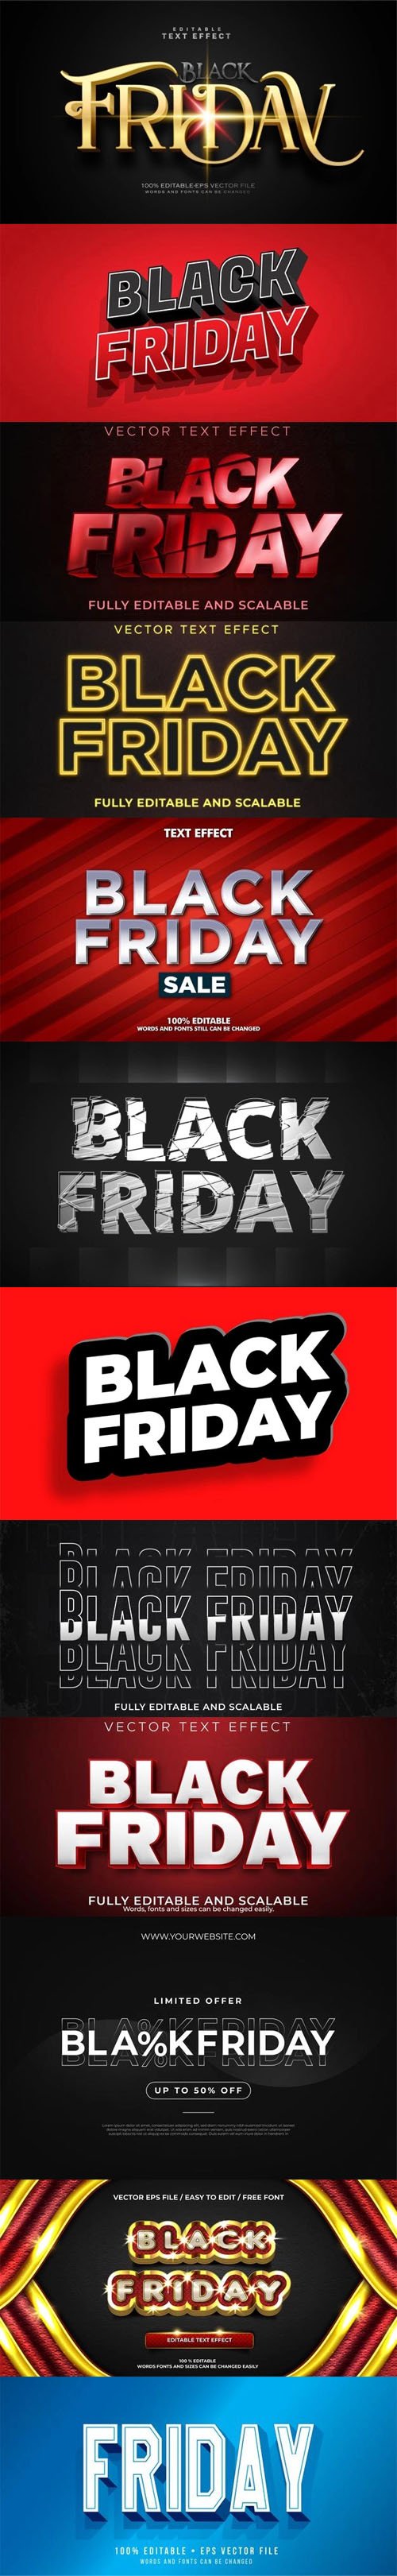 12 Black Friday Vector Text Effects Templates